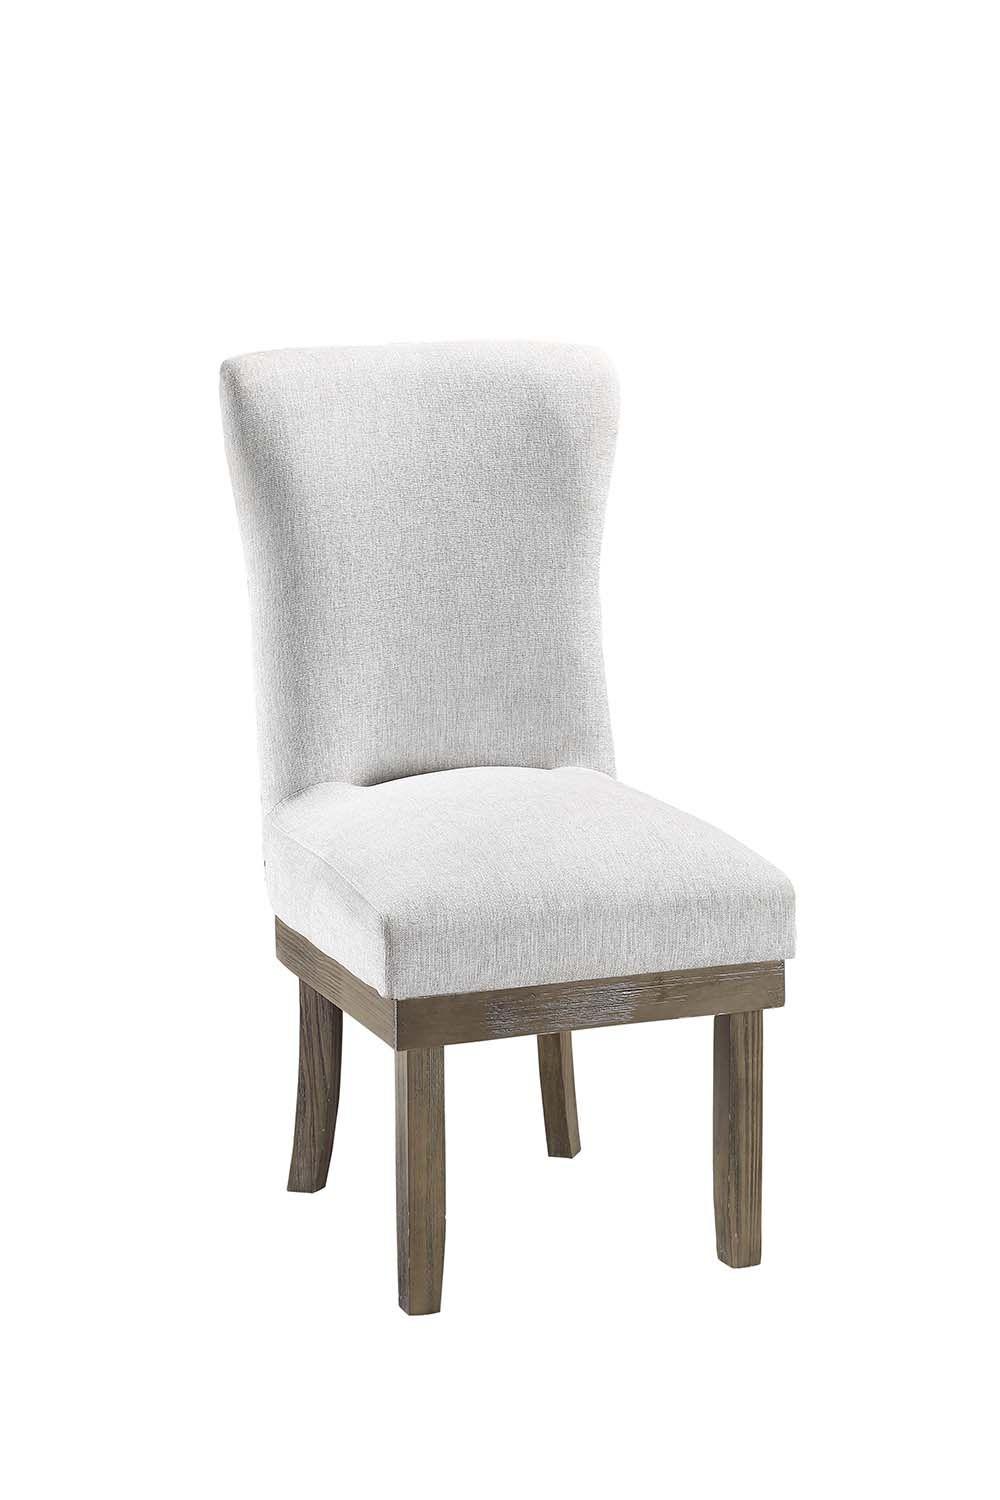 Traditional, Rustic Side Chair Set Landon DN00951-2pcs in Gray Linen